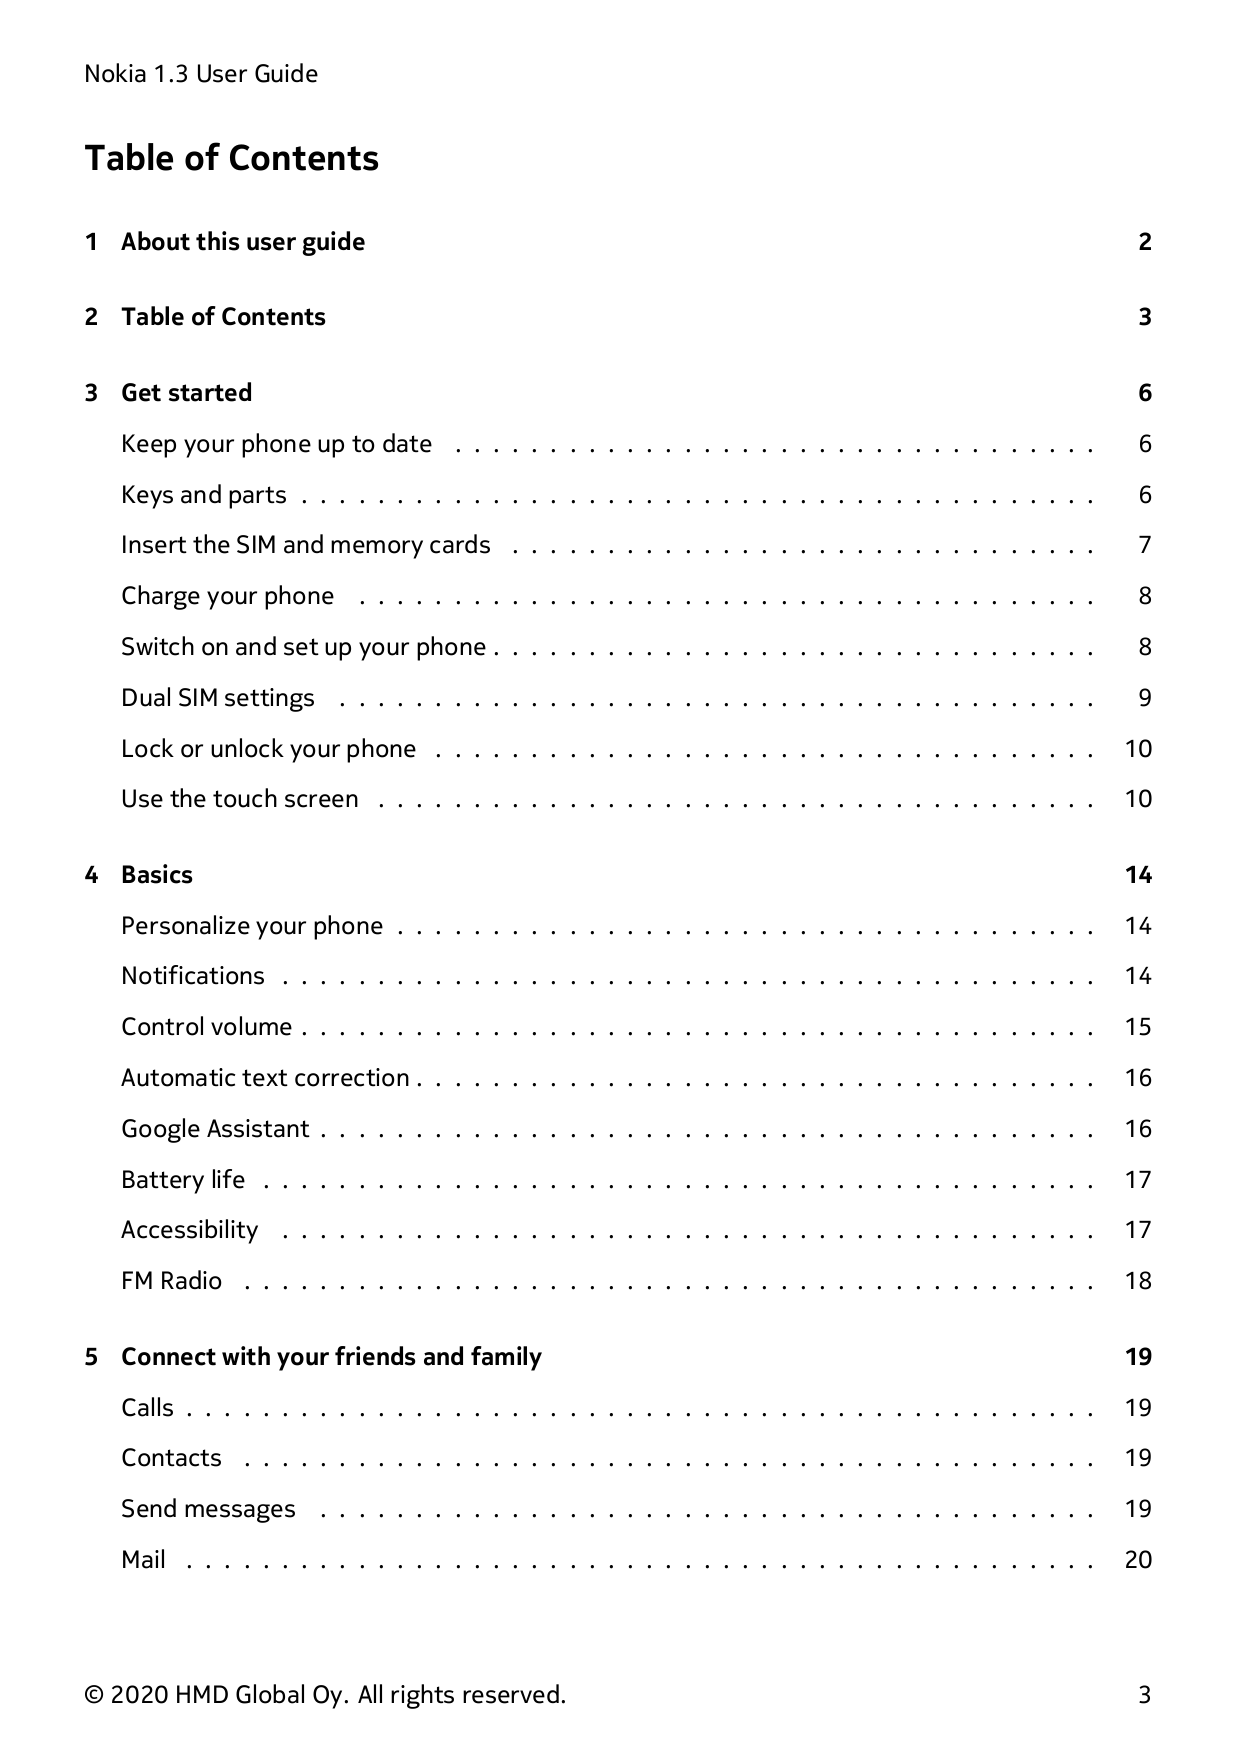 Nokia 1.3 User GuideTable of Contents1 About this user guide22 Table of Contents33 Get started6Keep your phone up to date . . . 